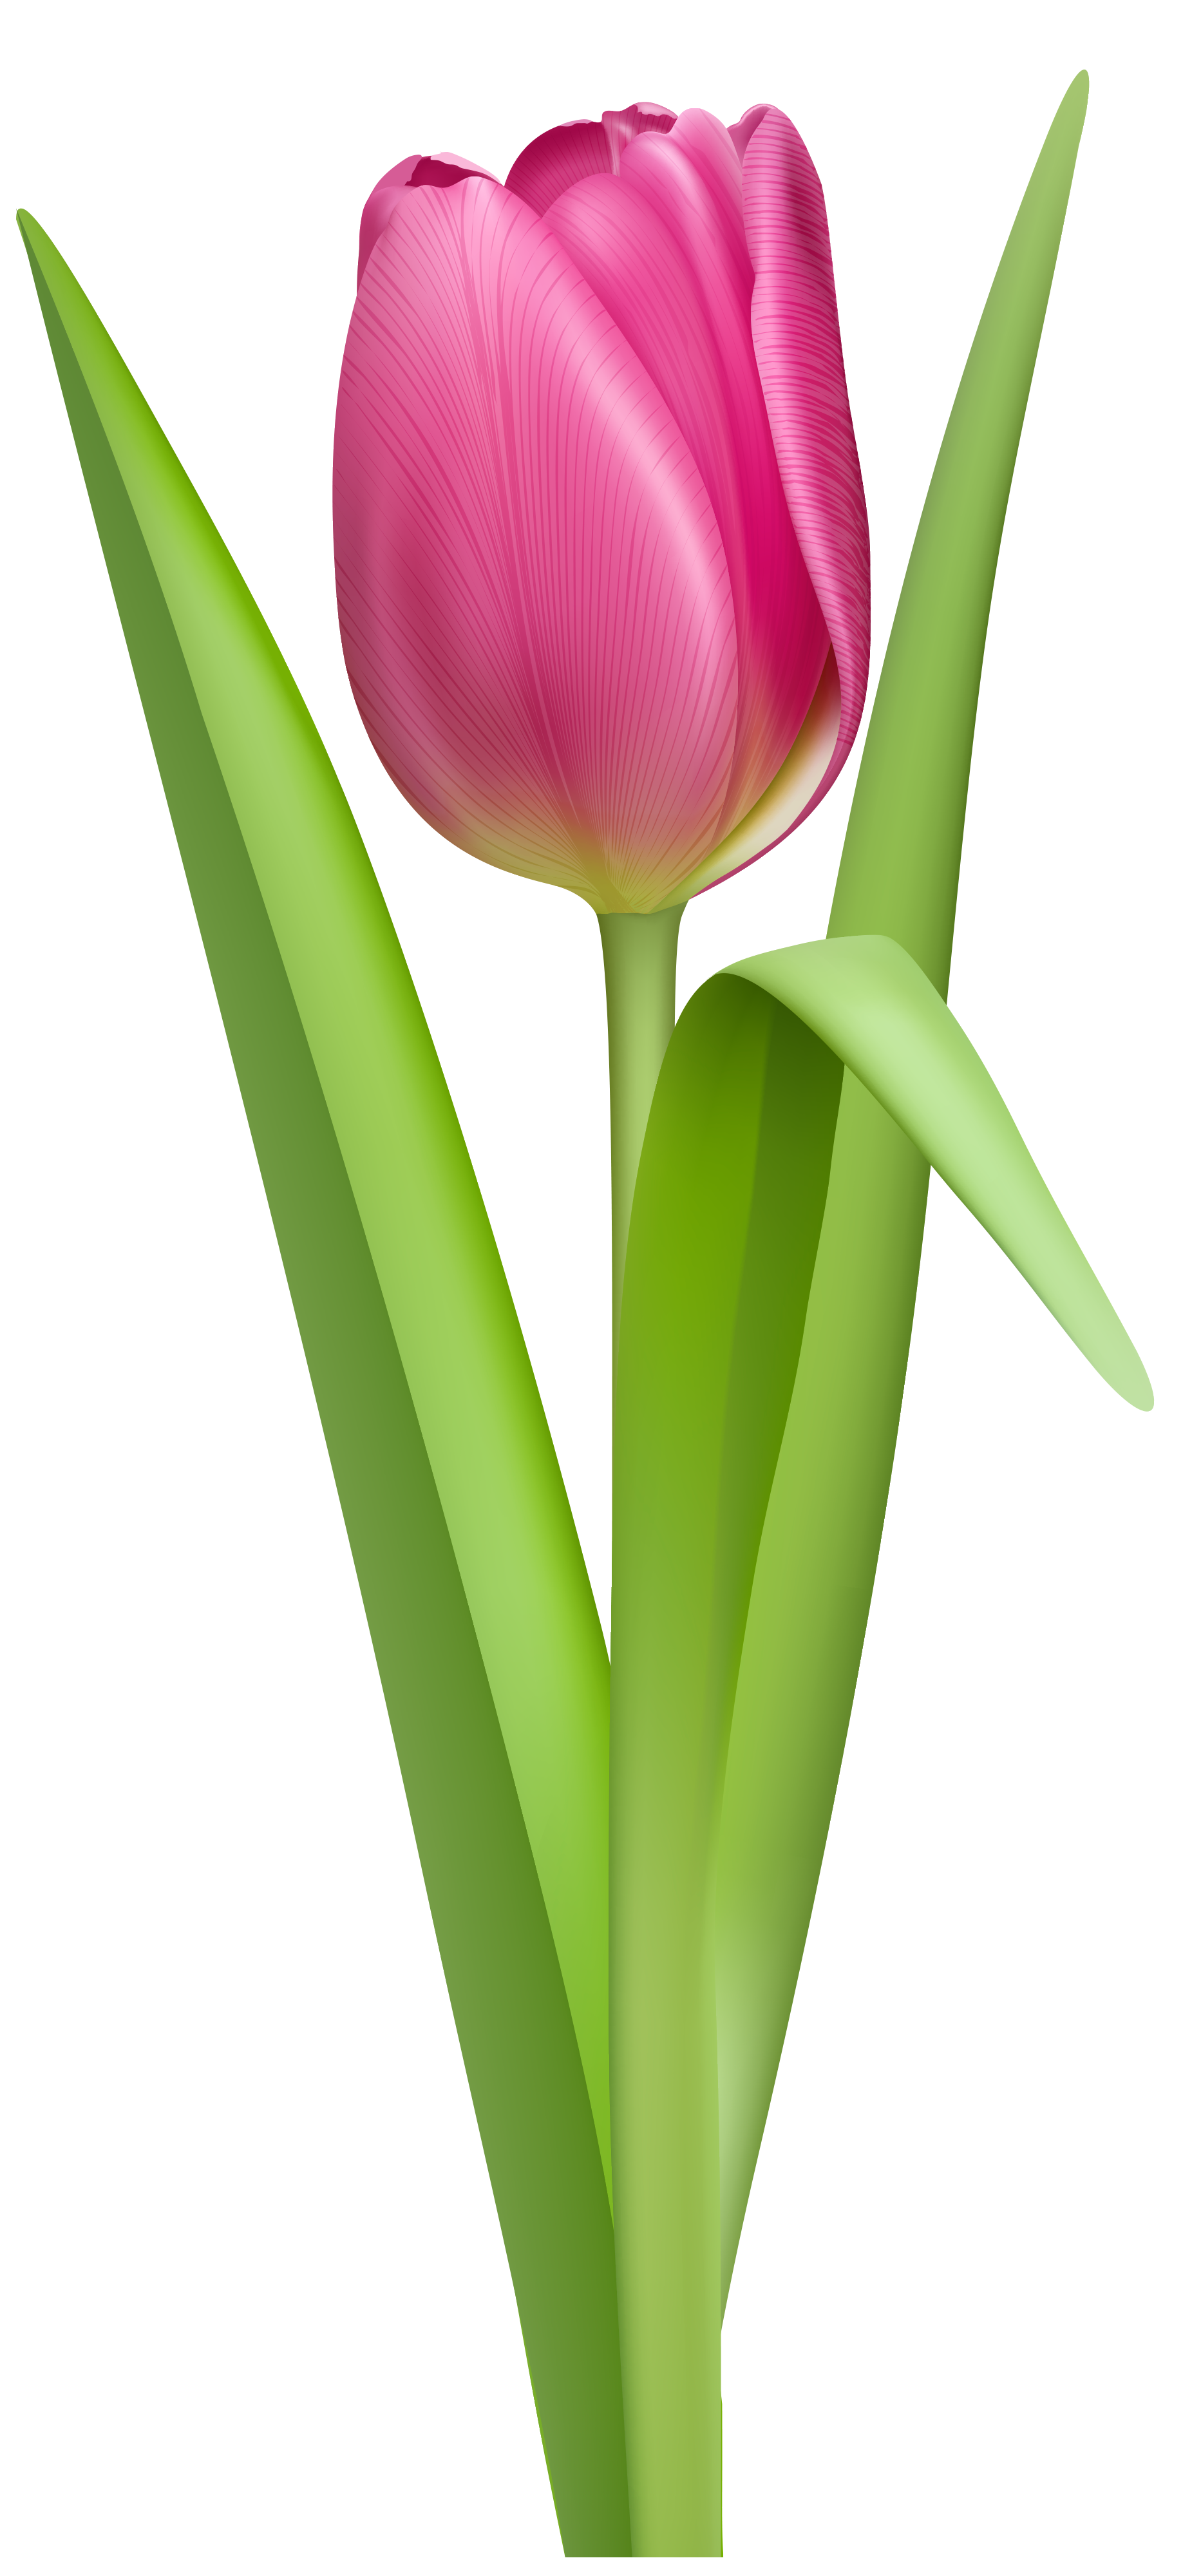 tulip clipart no background #42 | flower cliparts | Pinterest | Pink ...